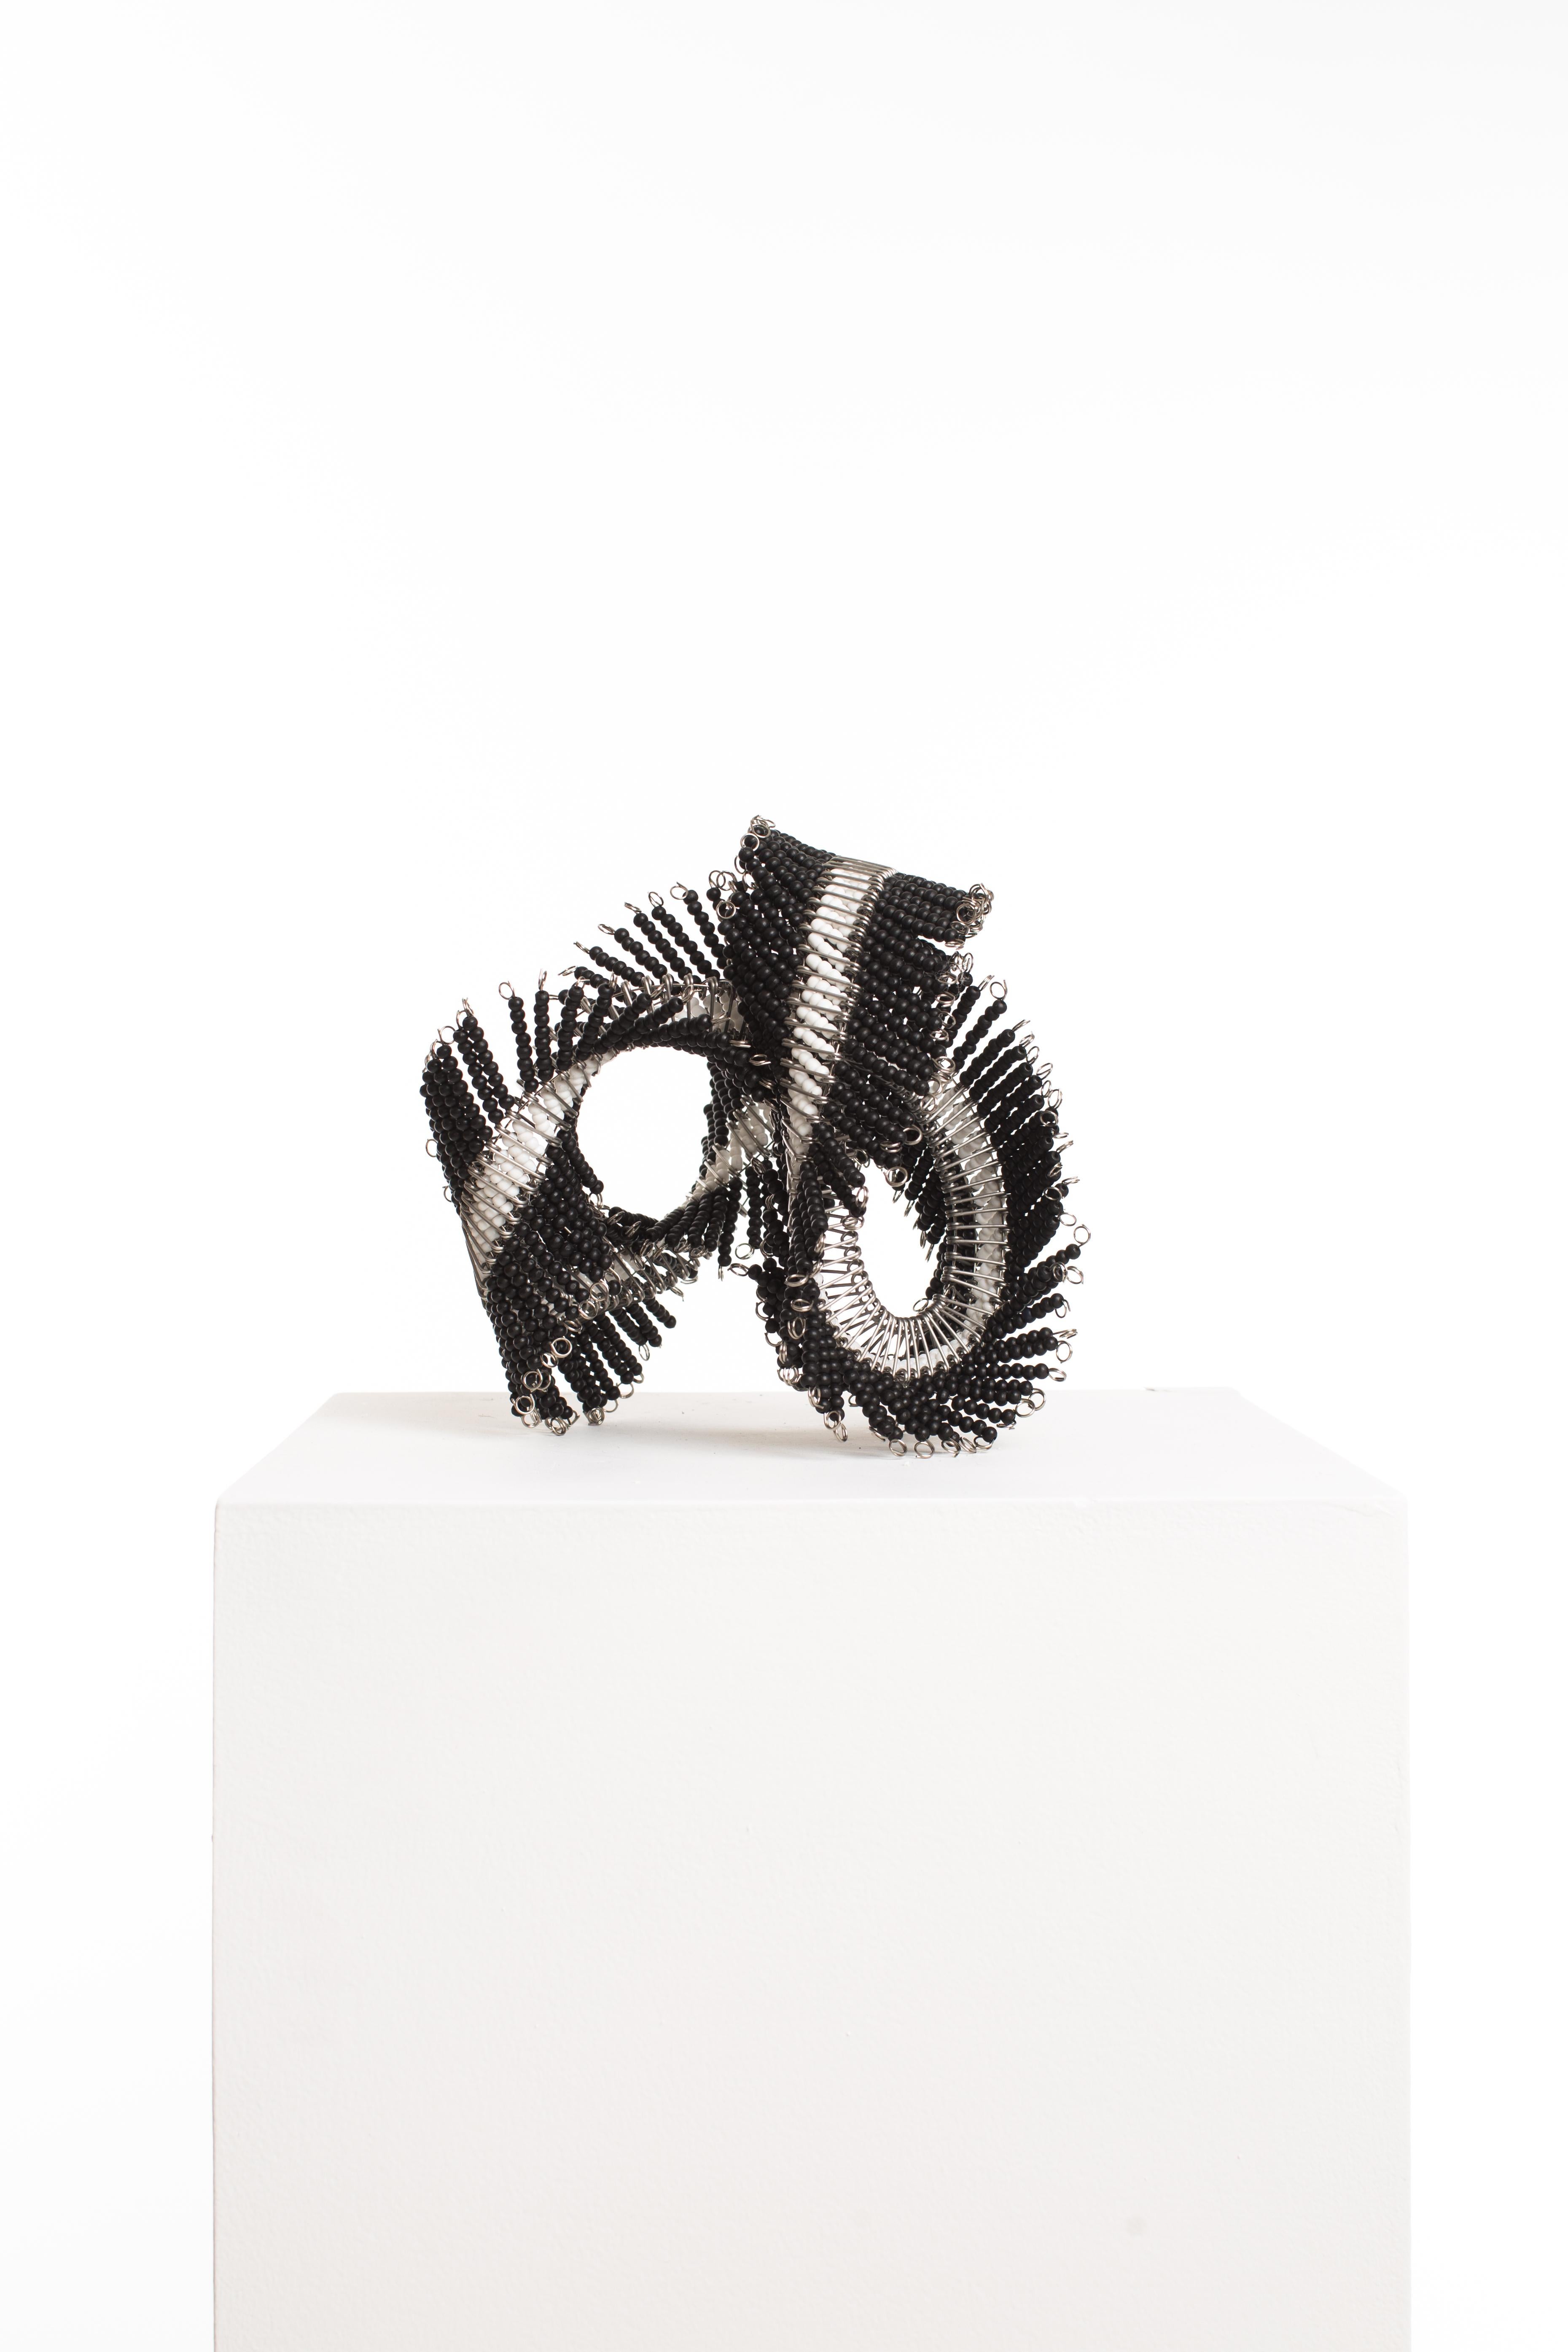 Black, White, Beaded, Steel, Pattern, Abstract, Contemporary, Modern, Art - Abstract Geometric Sculpture by Driaan Claassen